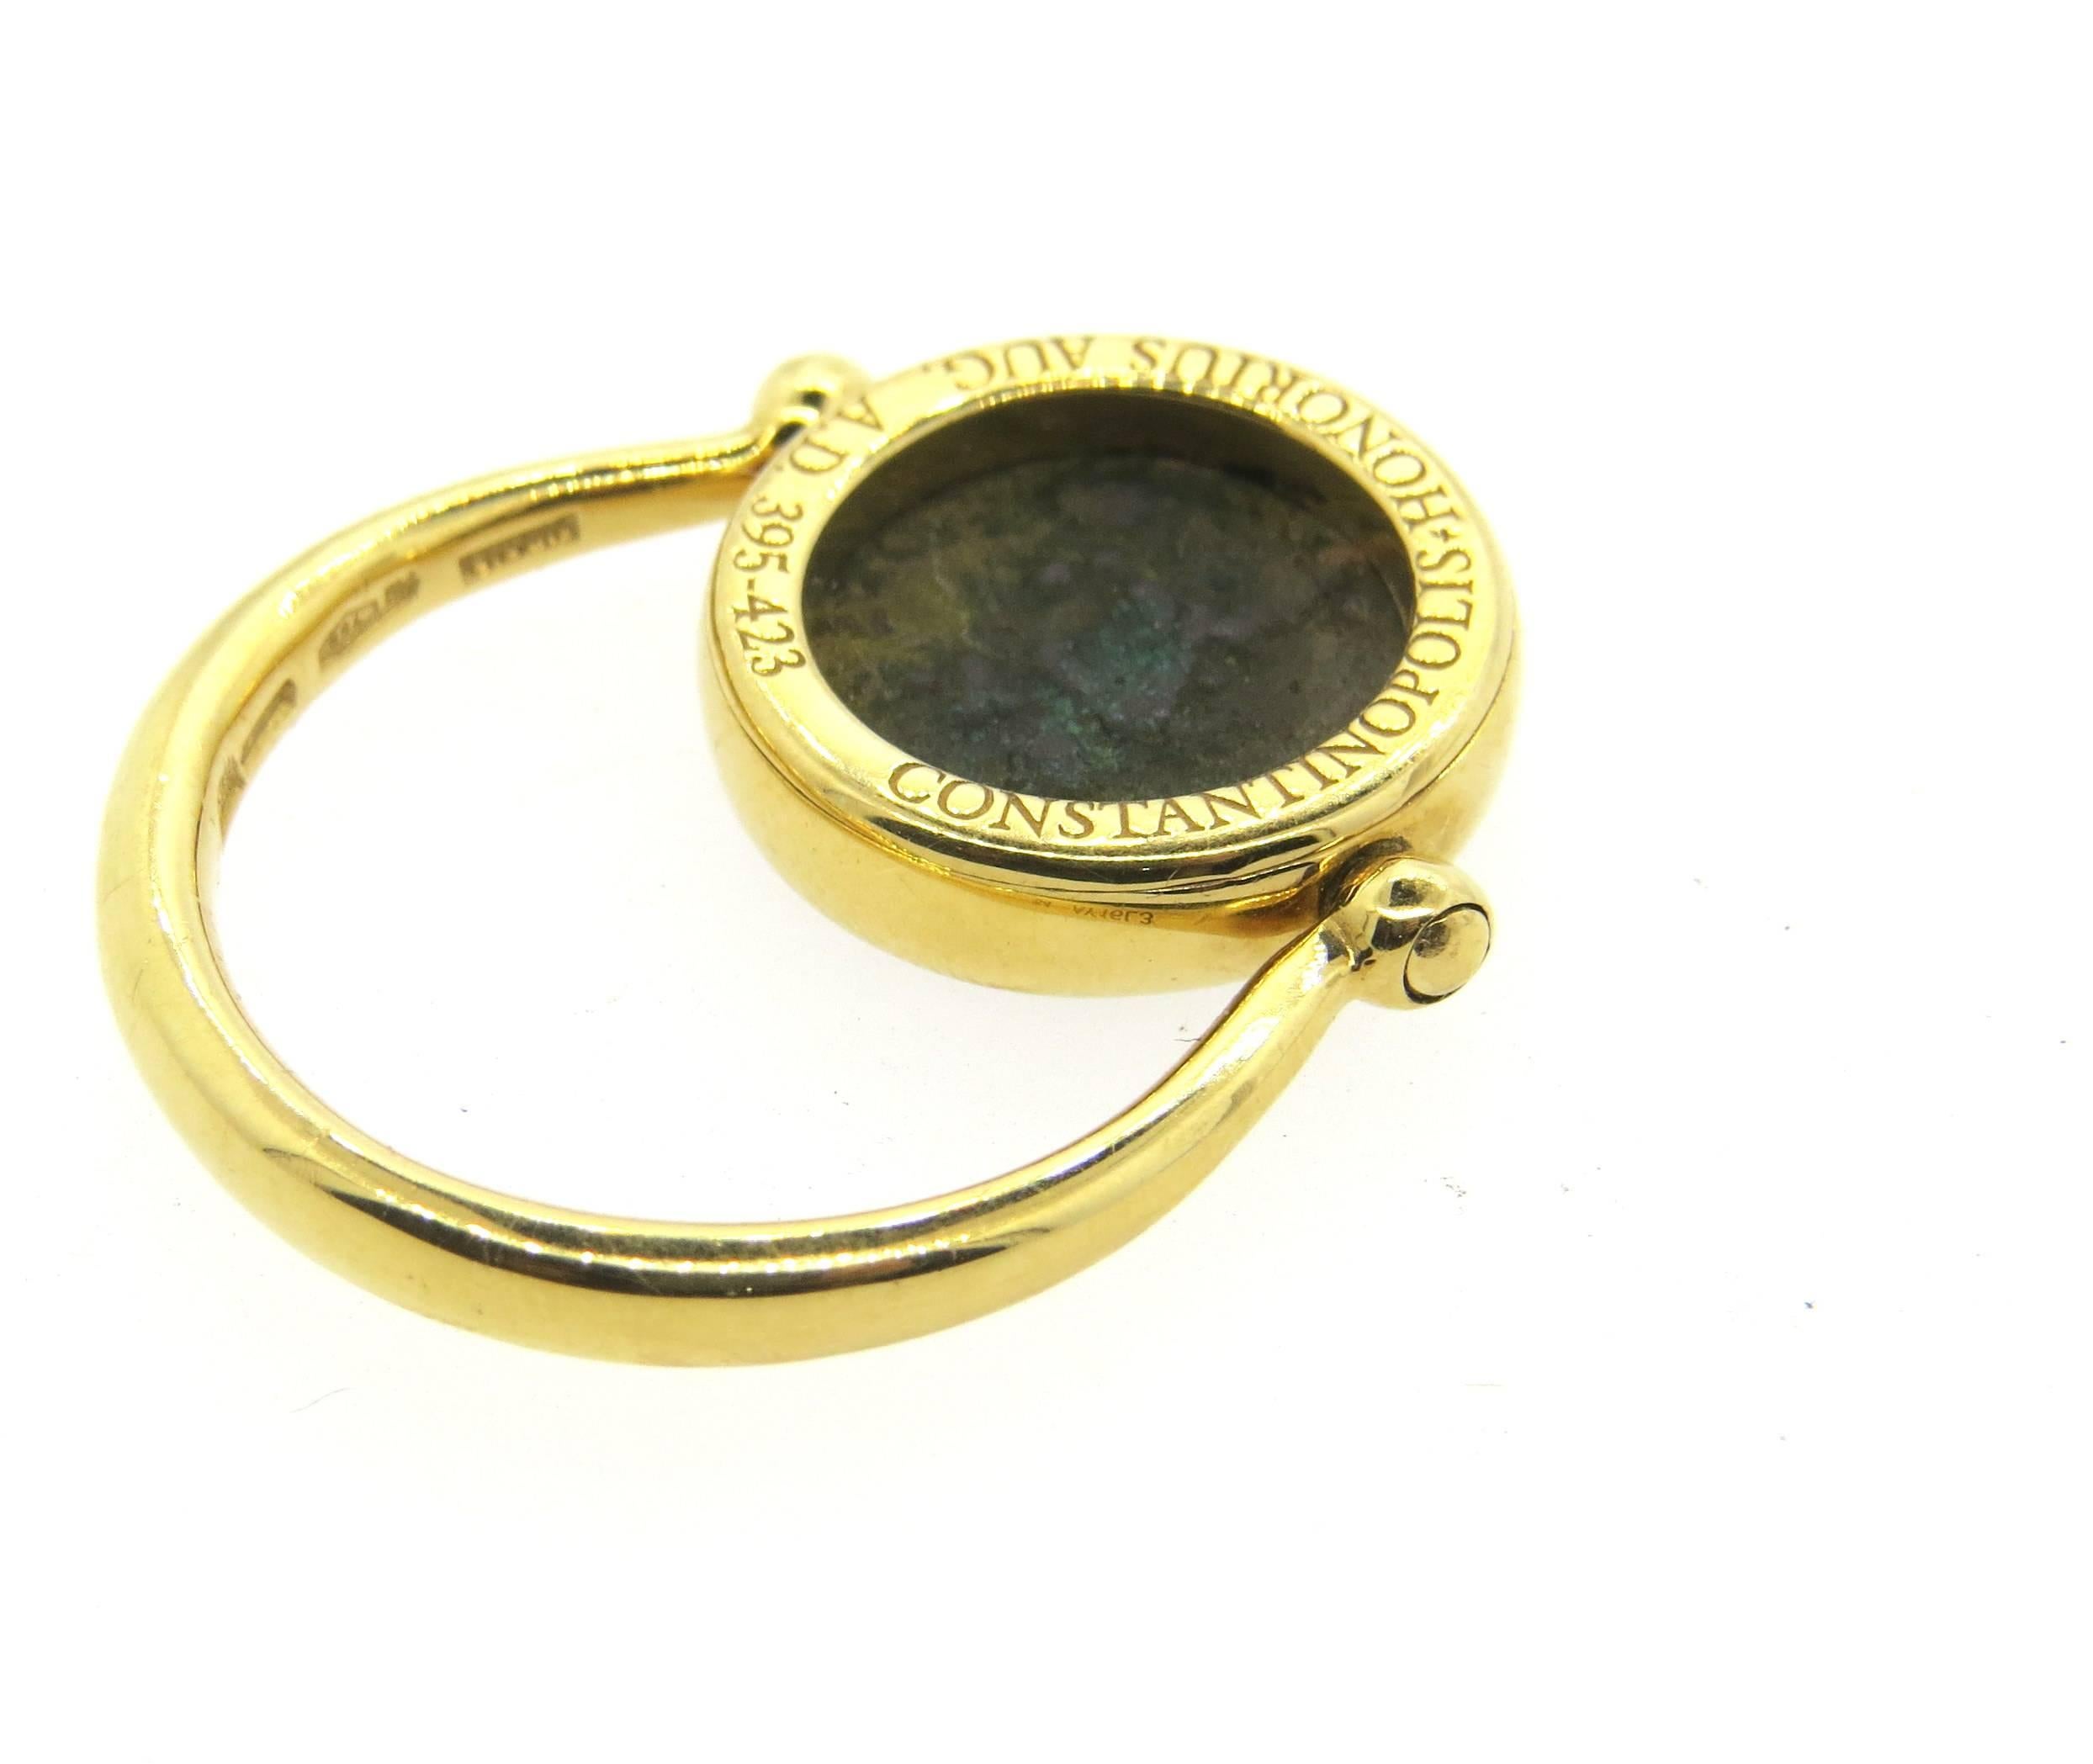 18k yellow gold ring, crafted by Bulgari for Monete collection, set with ancient coin in the center, featuring flip top. Ring is a size 6 1/2 - 6 3/4 (design of the ring yields slight size flexibility)  Top of the ring is 14.5mm in diameter. Marked